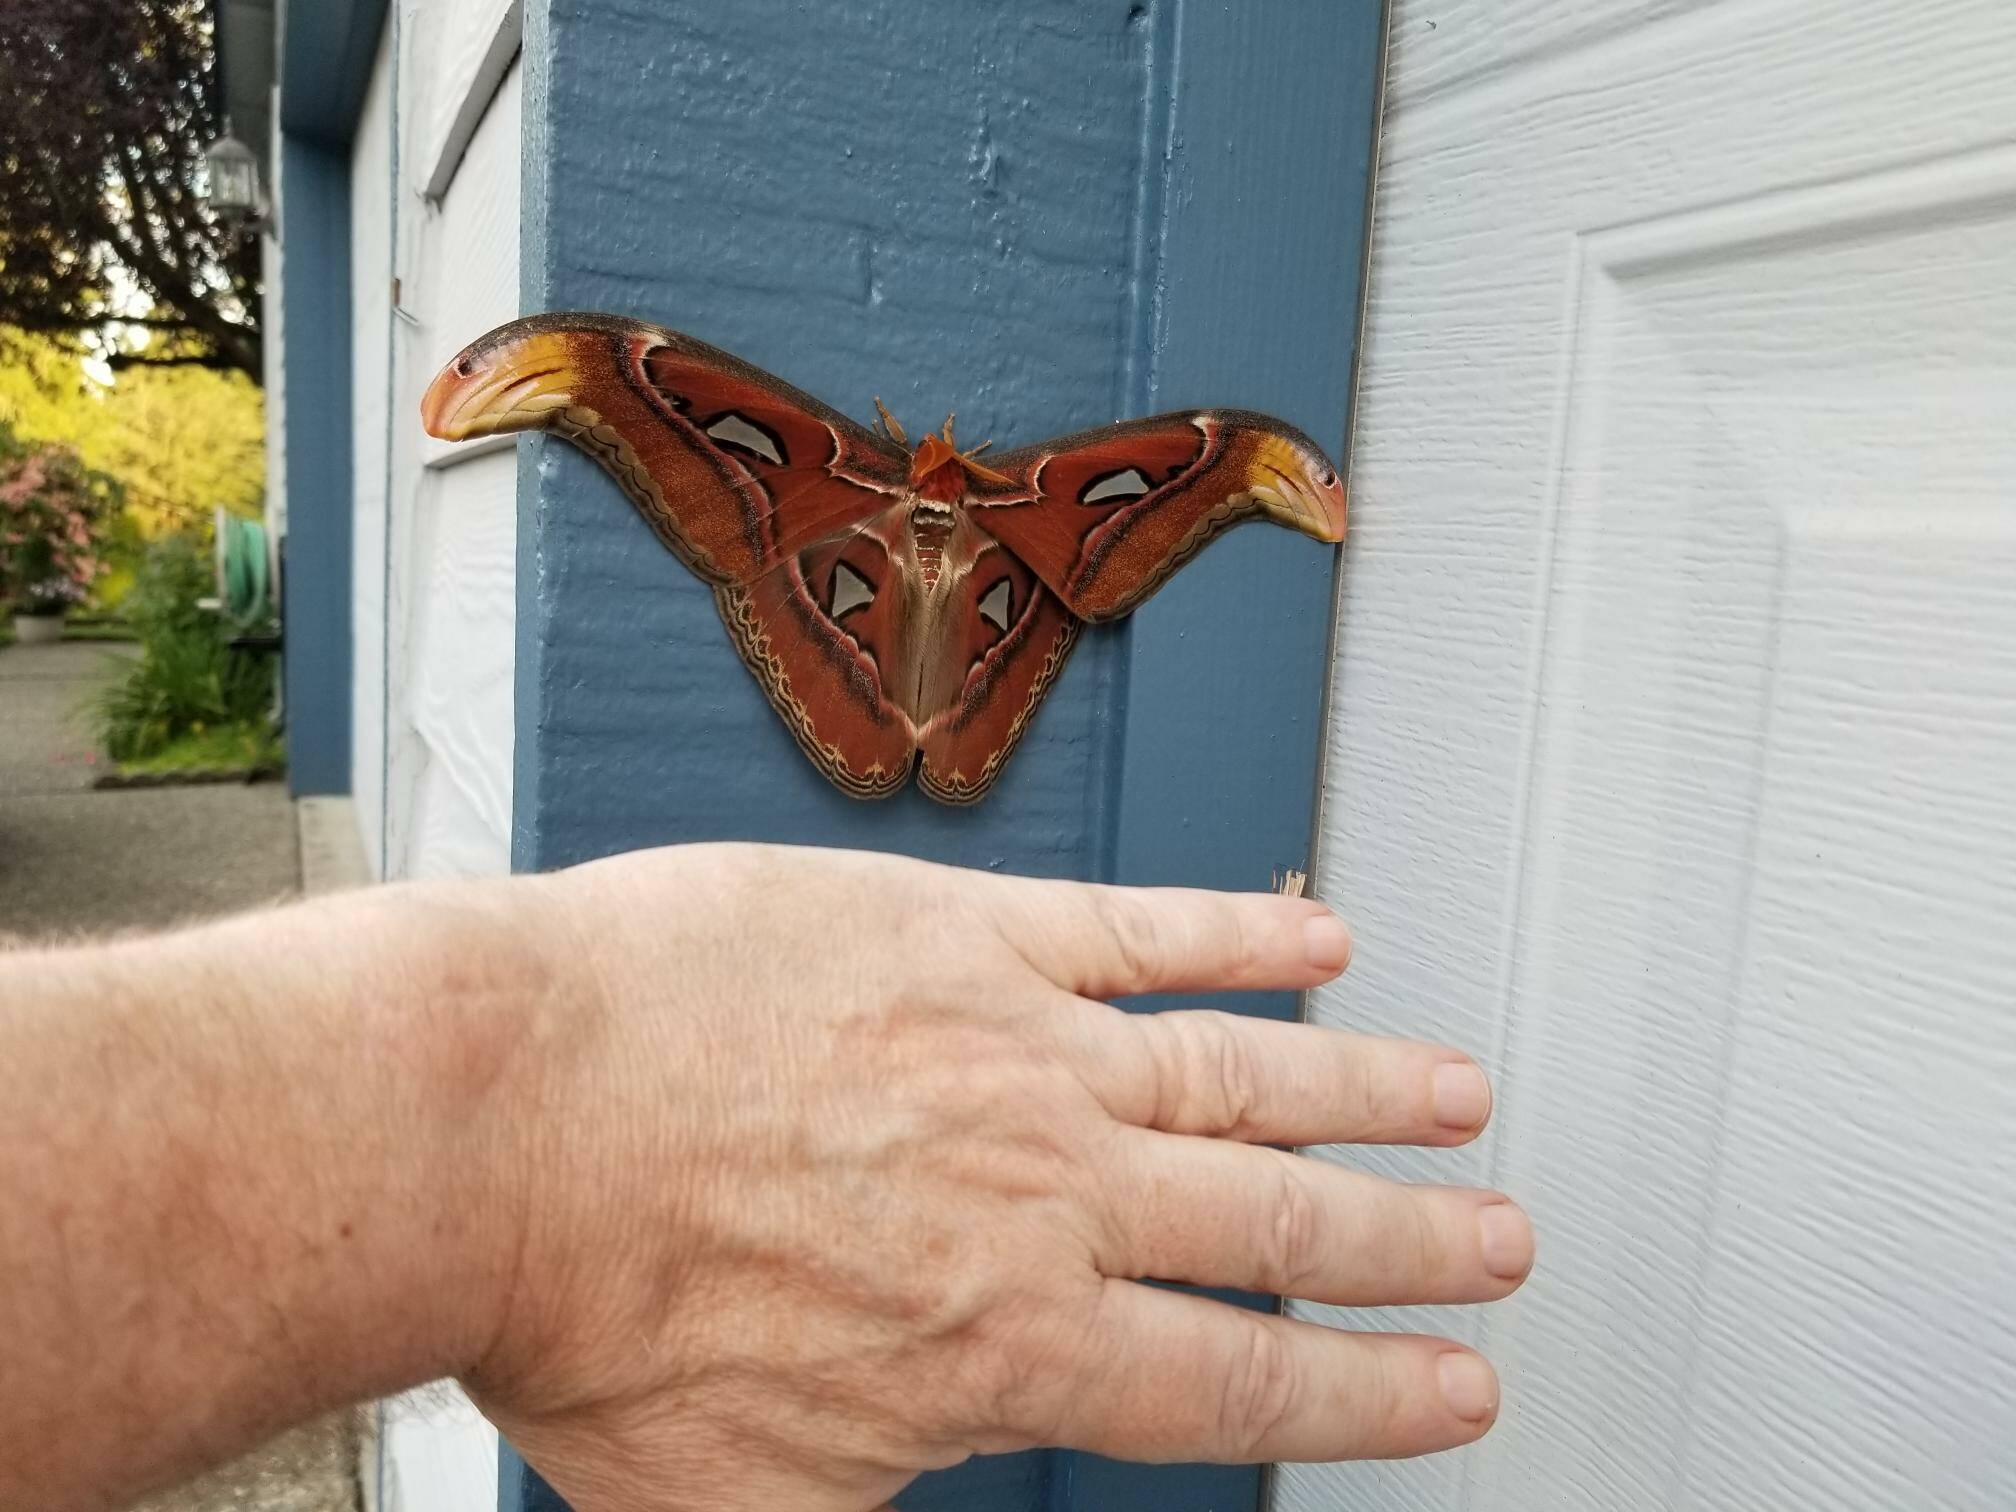 The size of the atlas moth in comparison to the size of a man’s hand. Courtesy of WSDA.